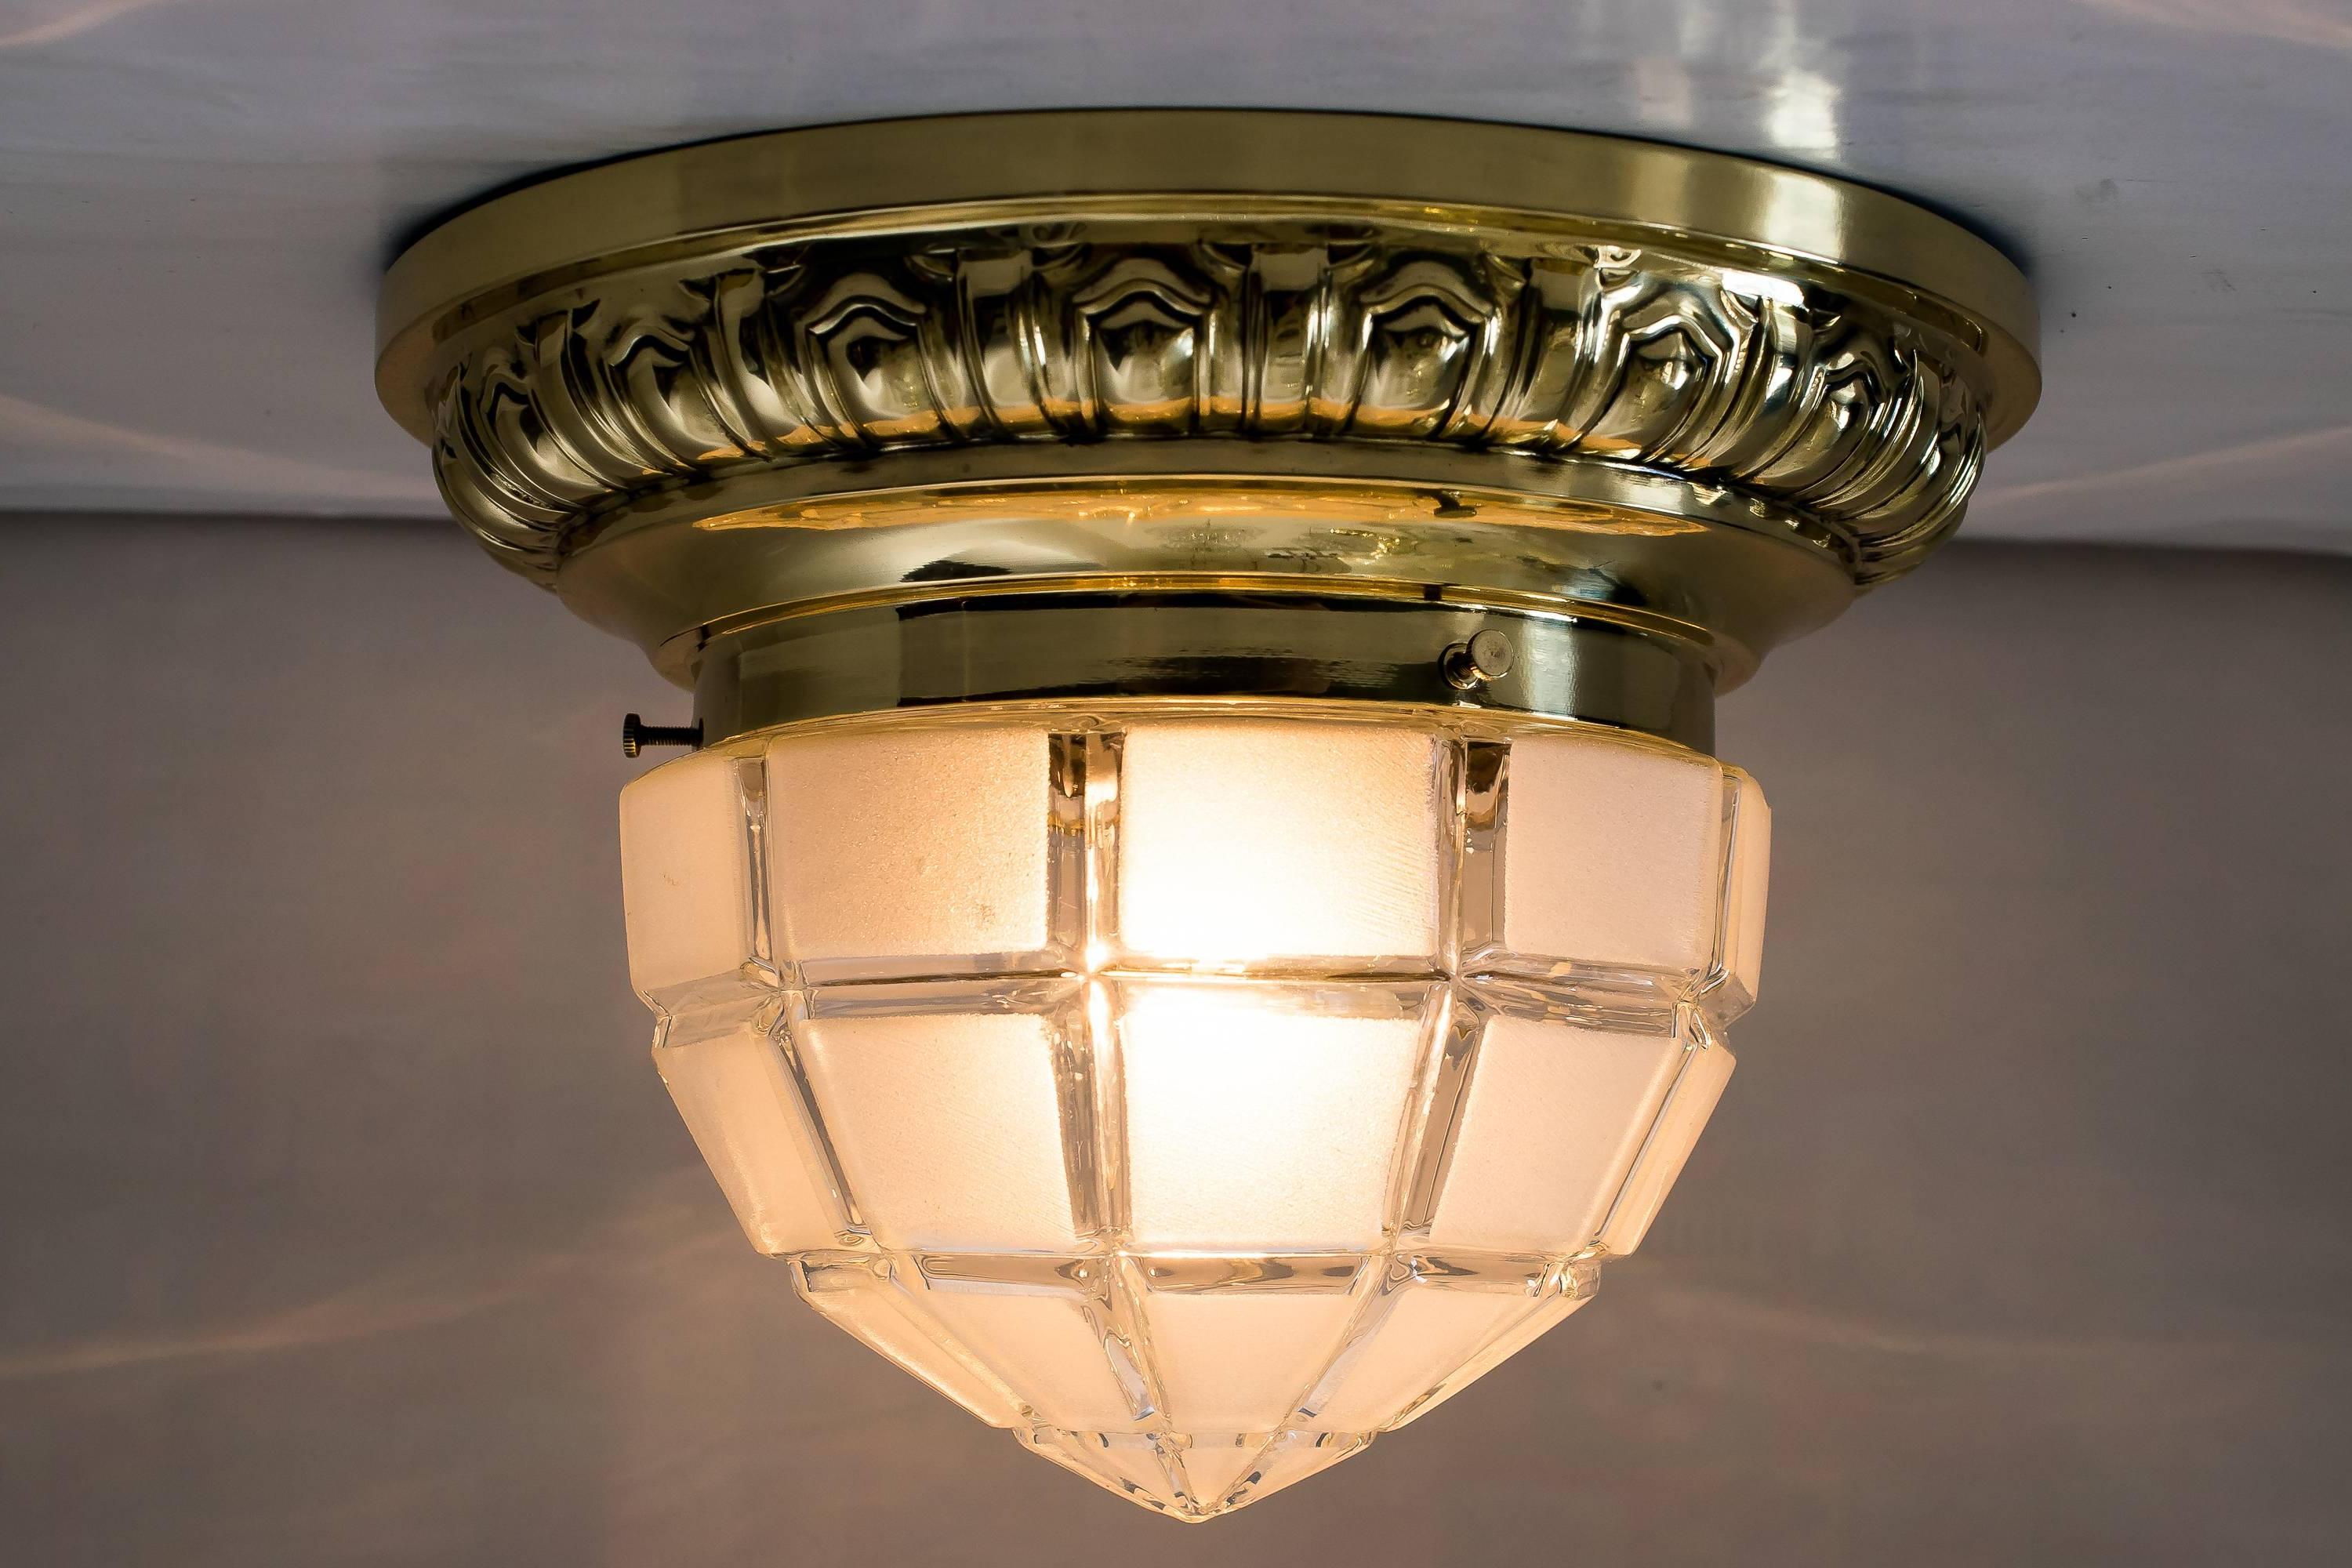 Art Nouveau ceiling lamp, circa 1908
polished and stove enameled.